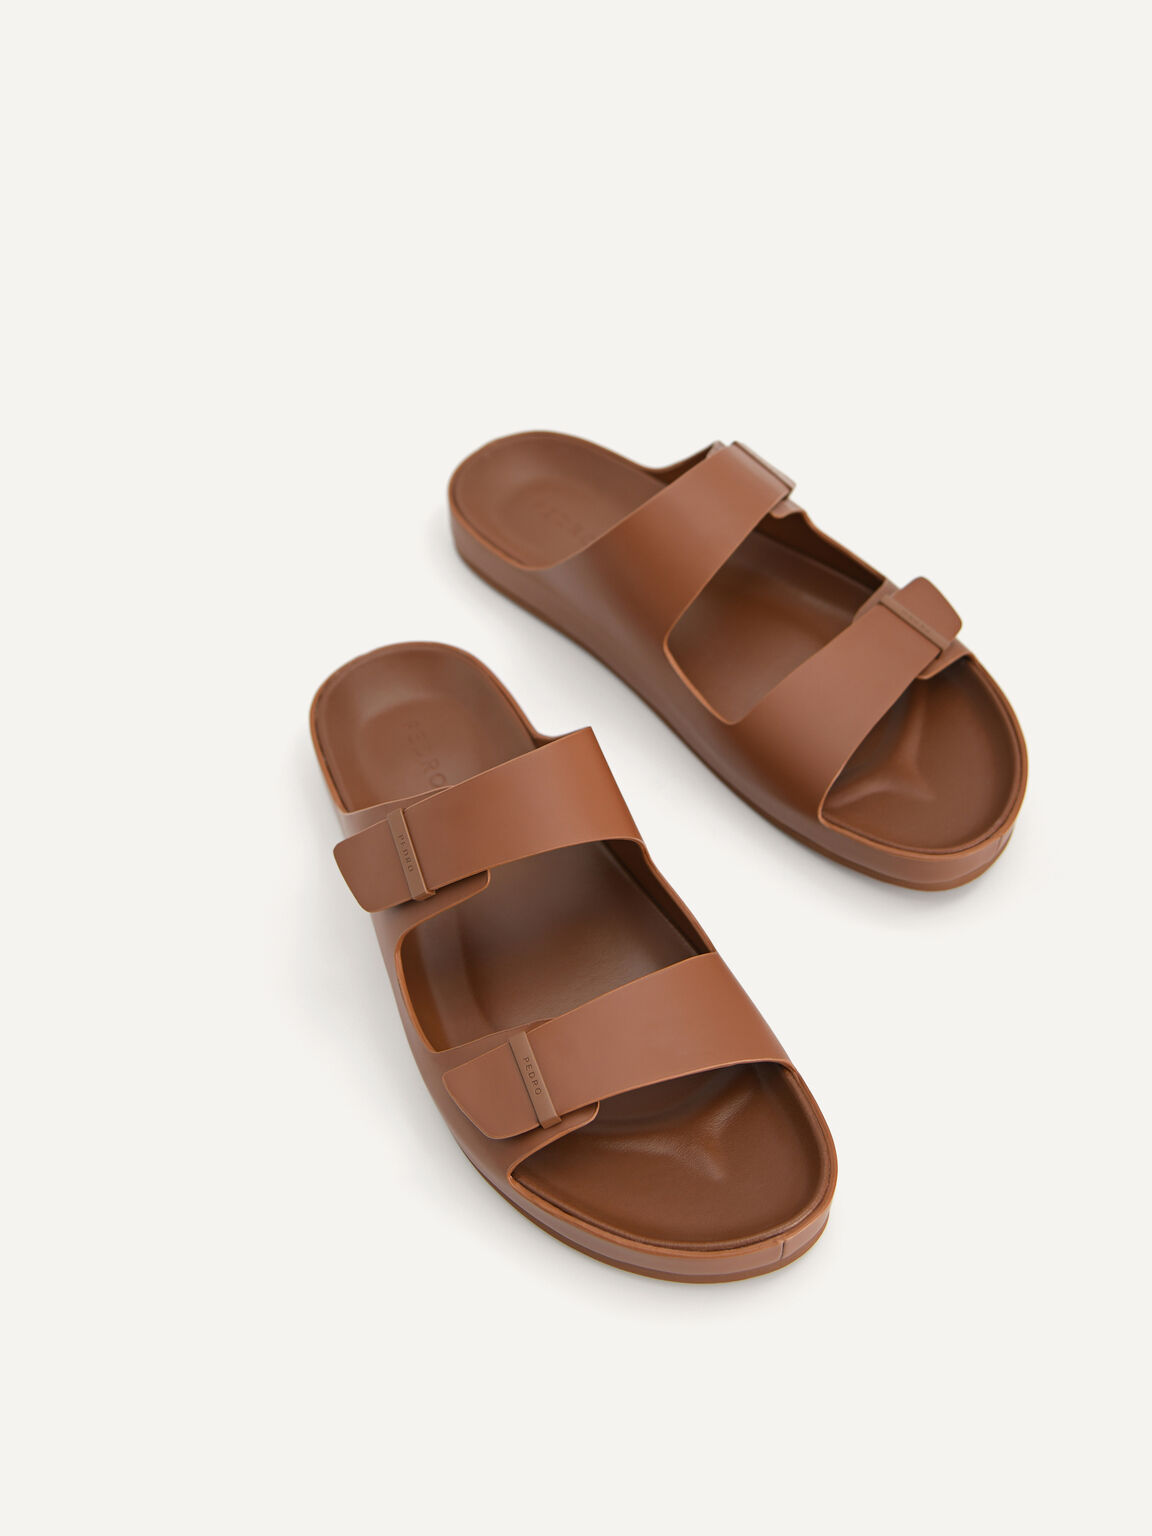 Double Strap Sandals, Brown